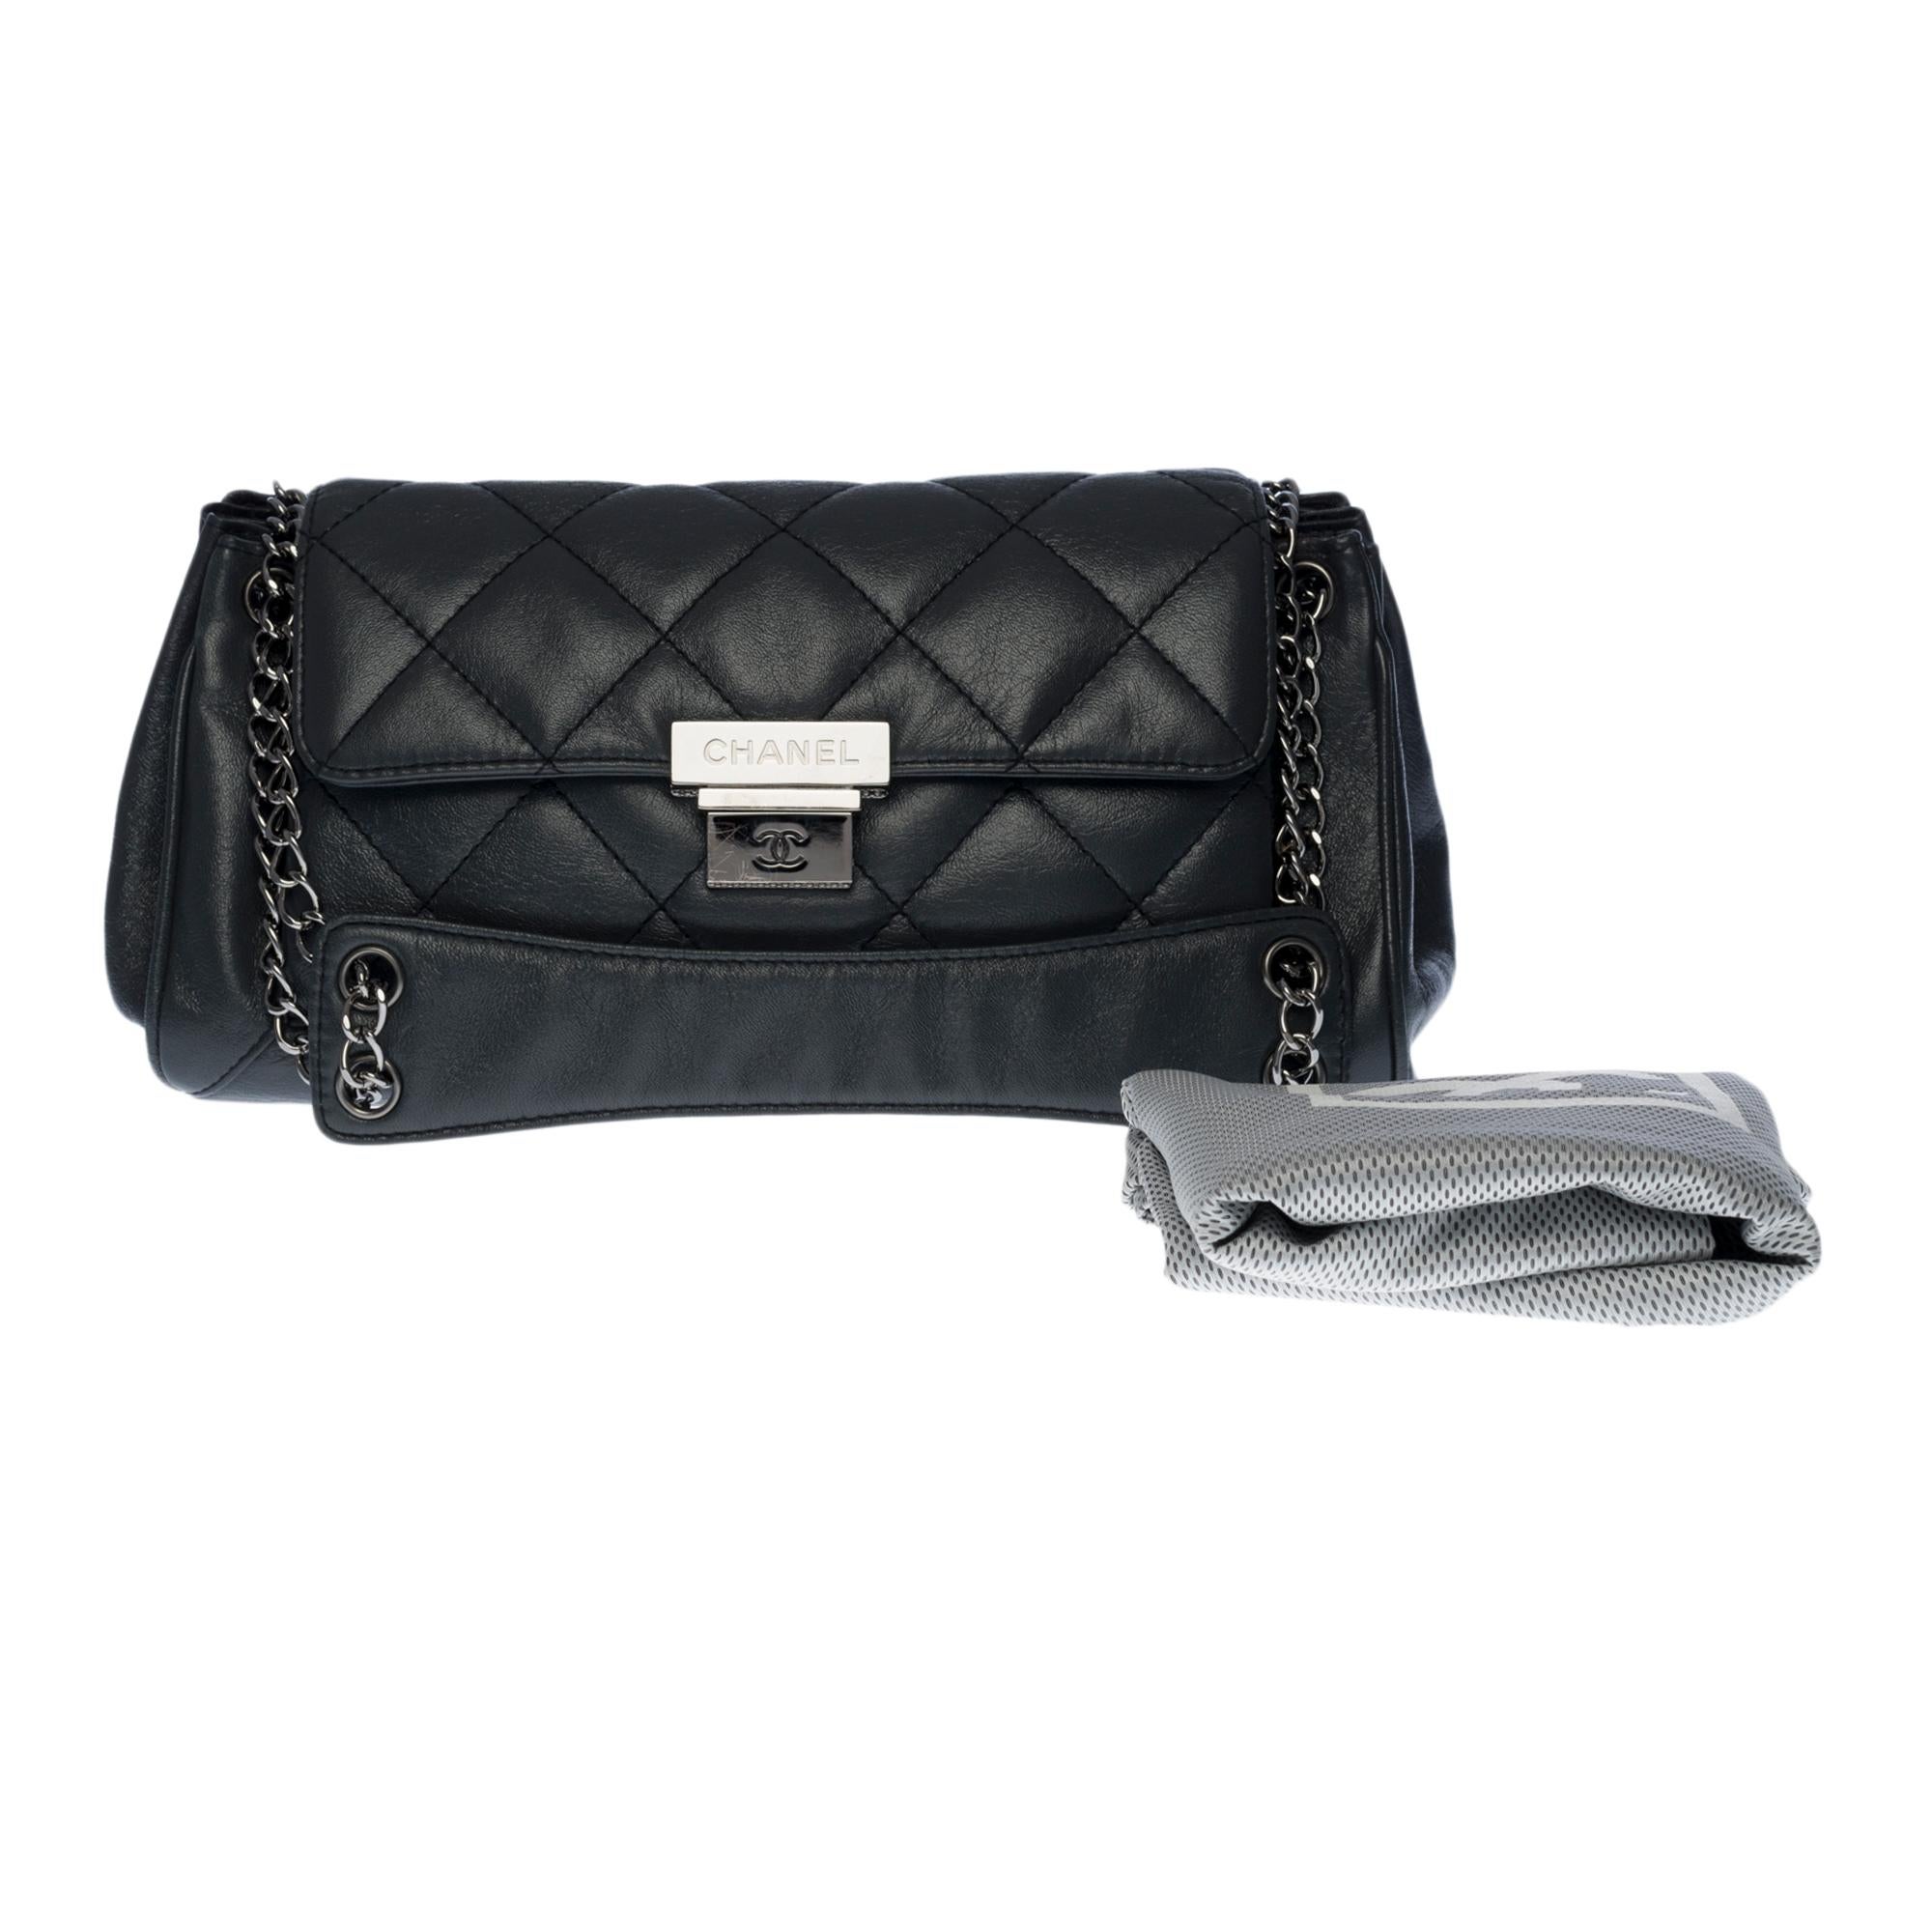 Chanel Classic Flap shoulder bag in grey quilted leather, SHW 5